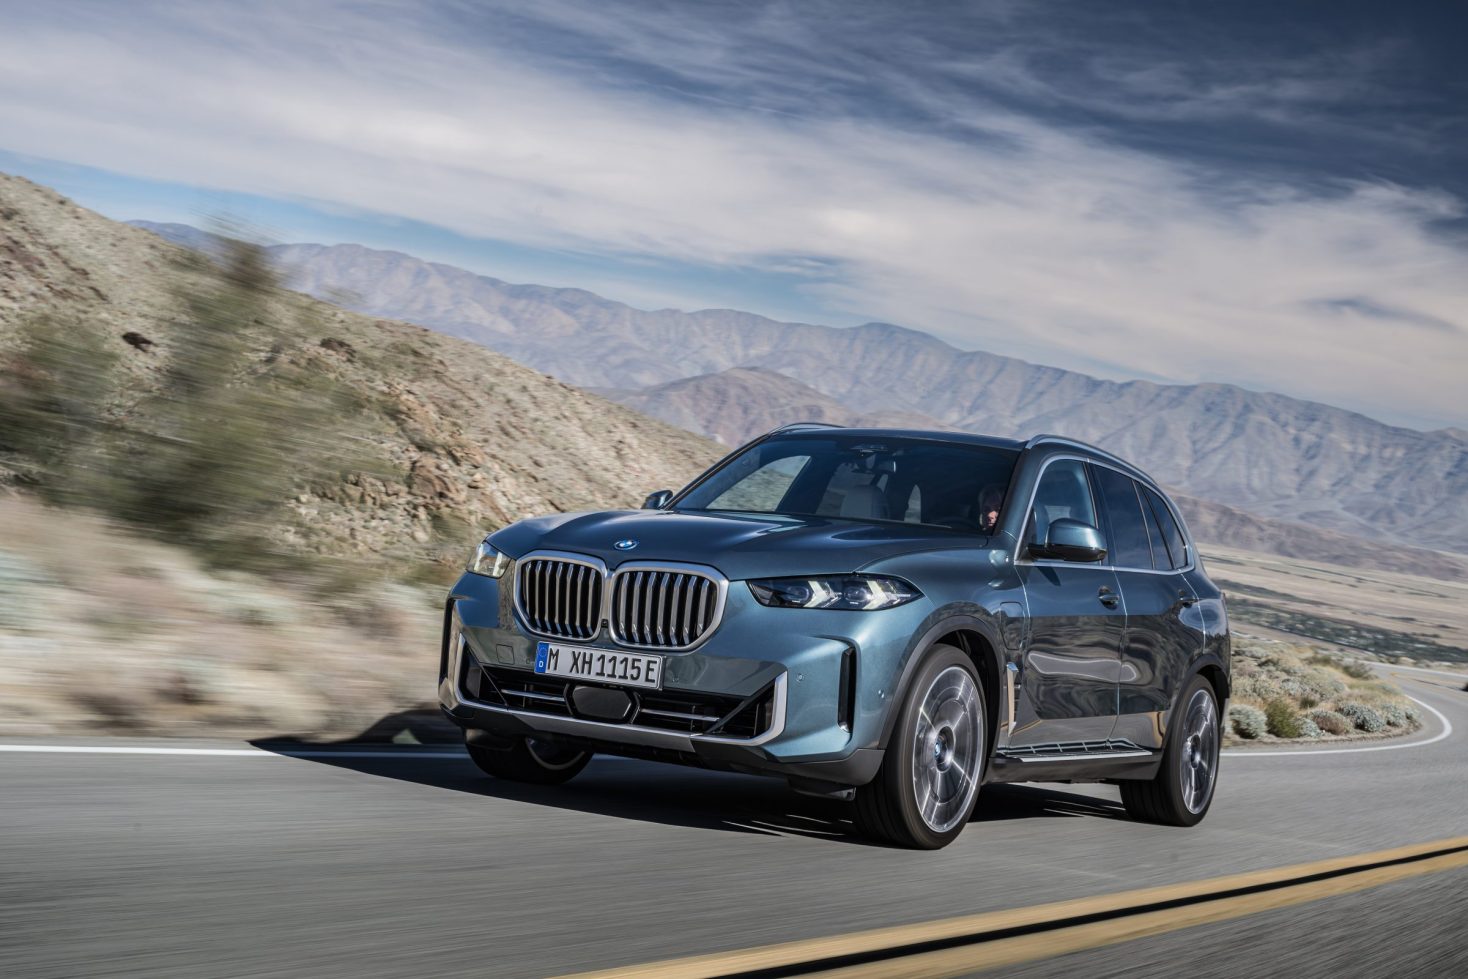 The BMW X5 SDrive40i, Performance and Efficiency Together